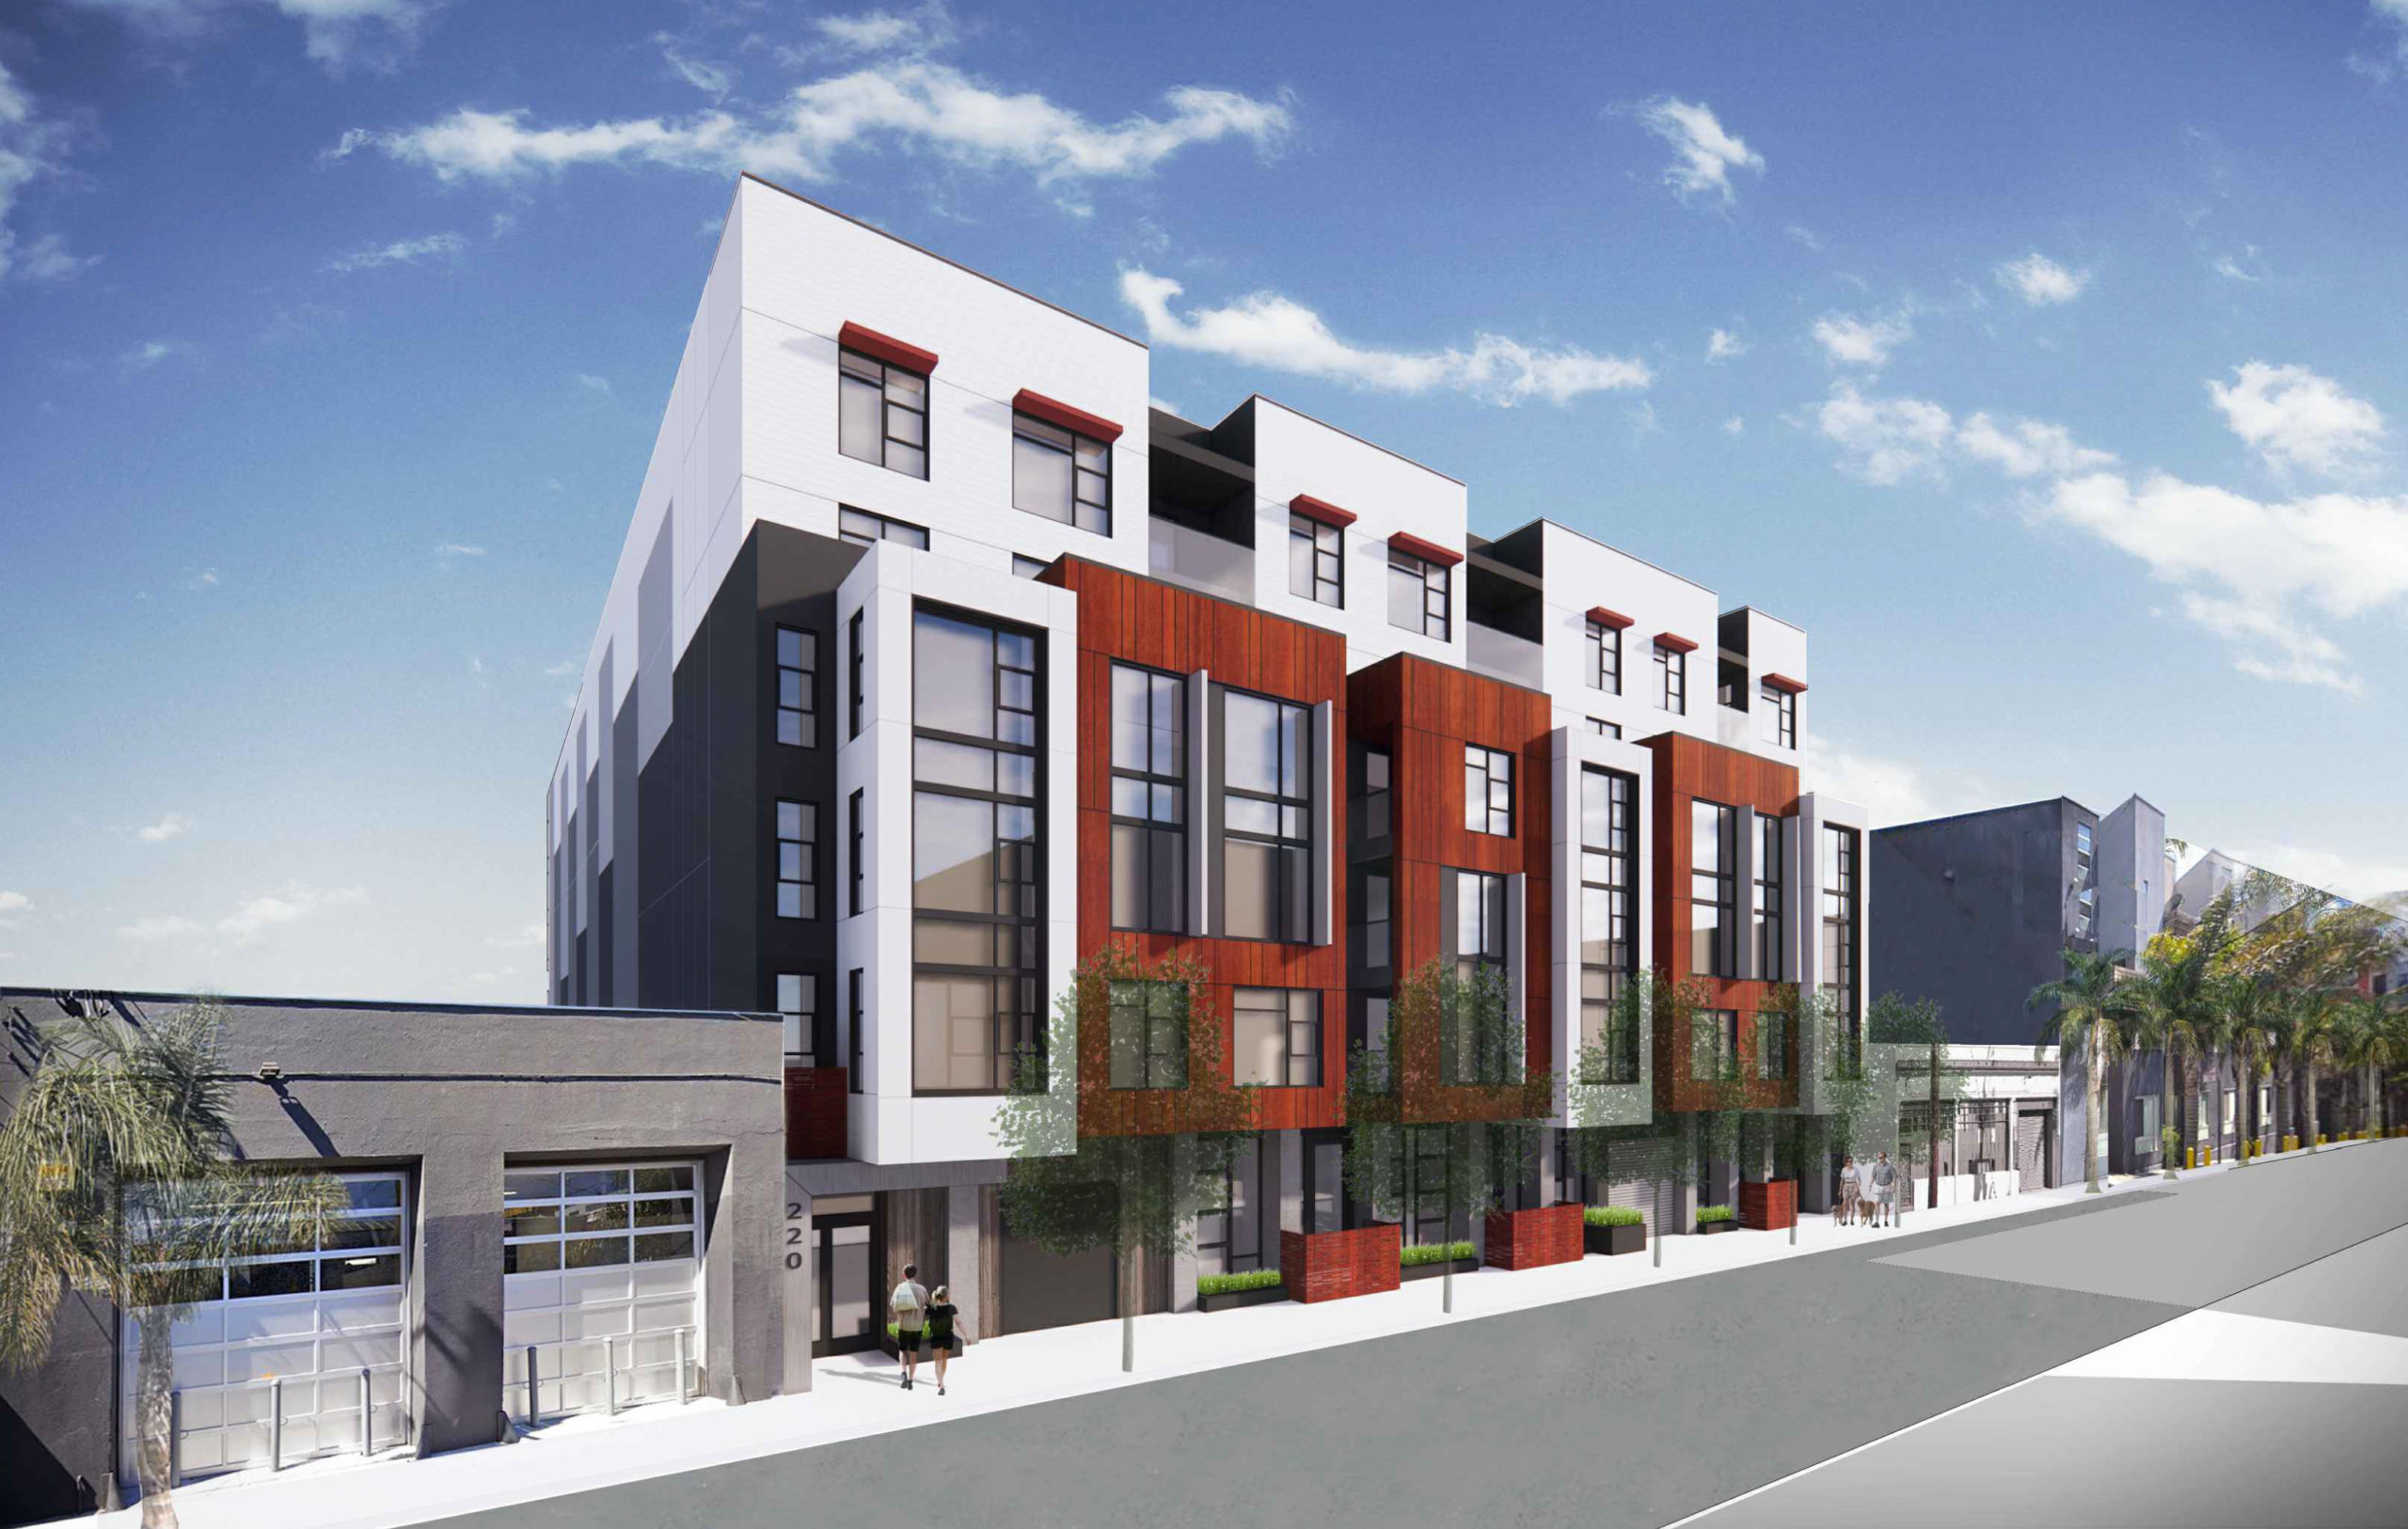 220 9th Street facade along Dore Street, rendering by Levy Design Partners